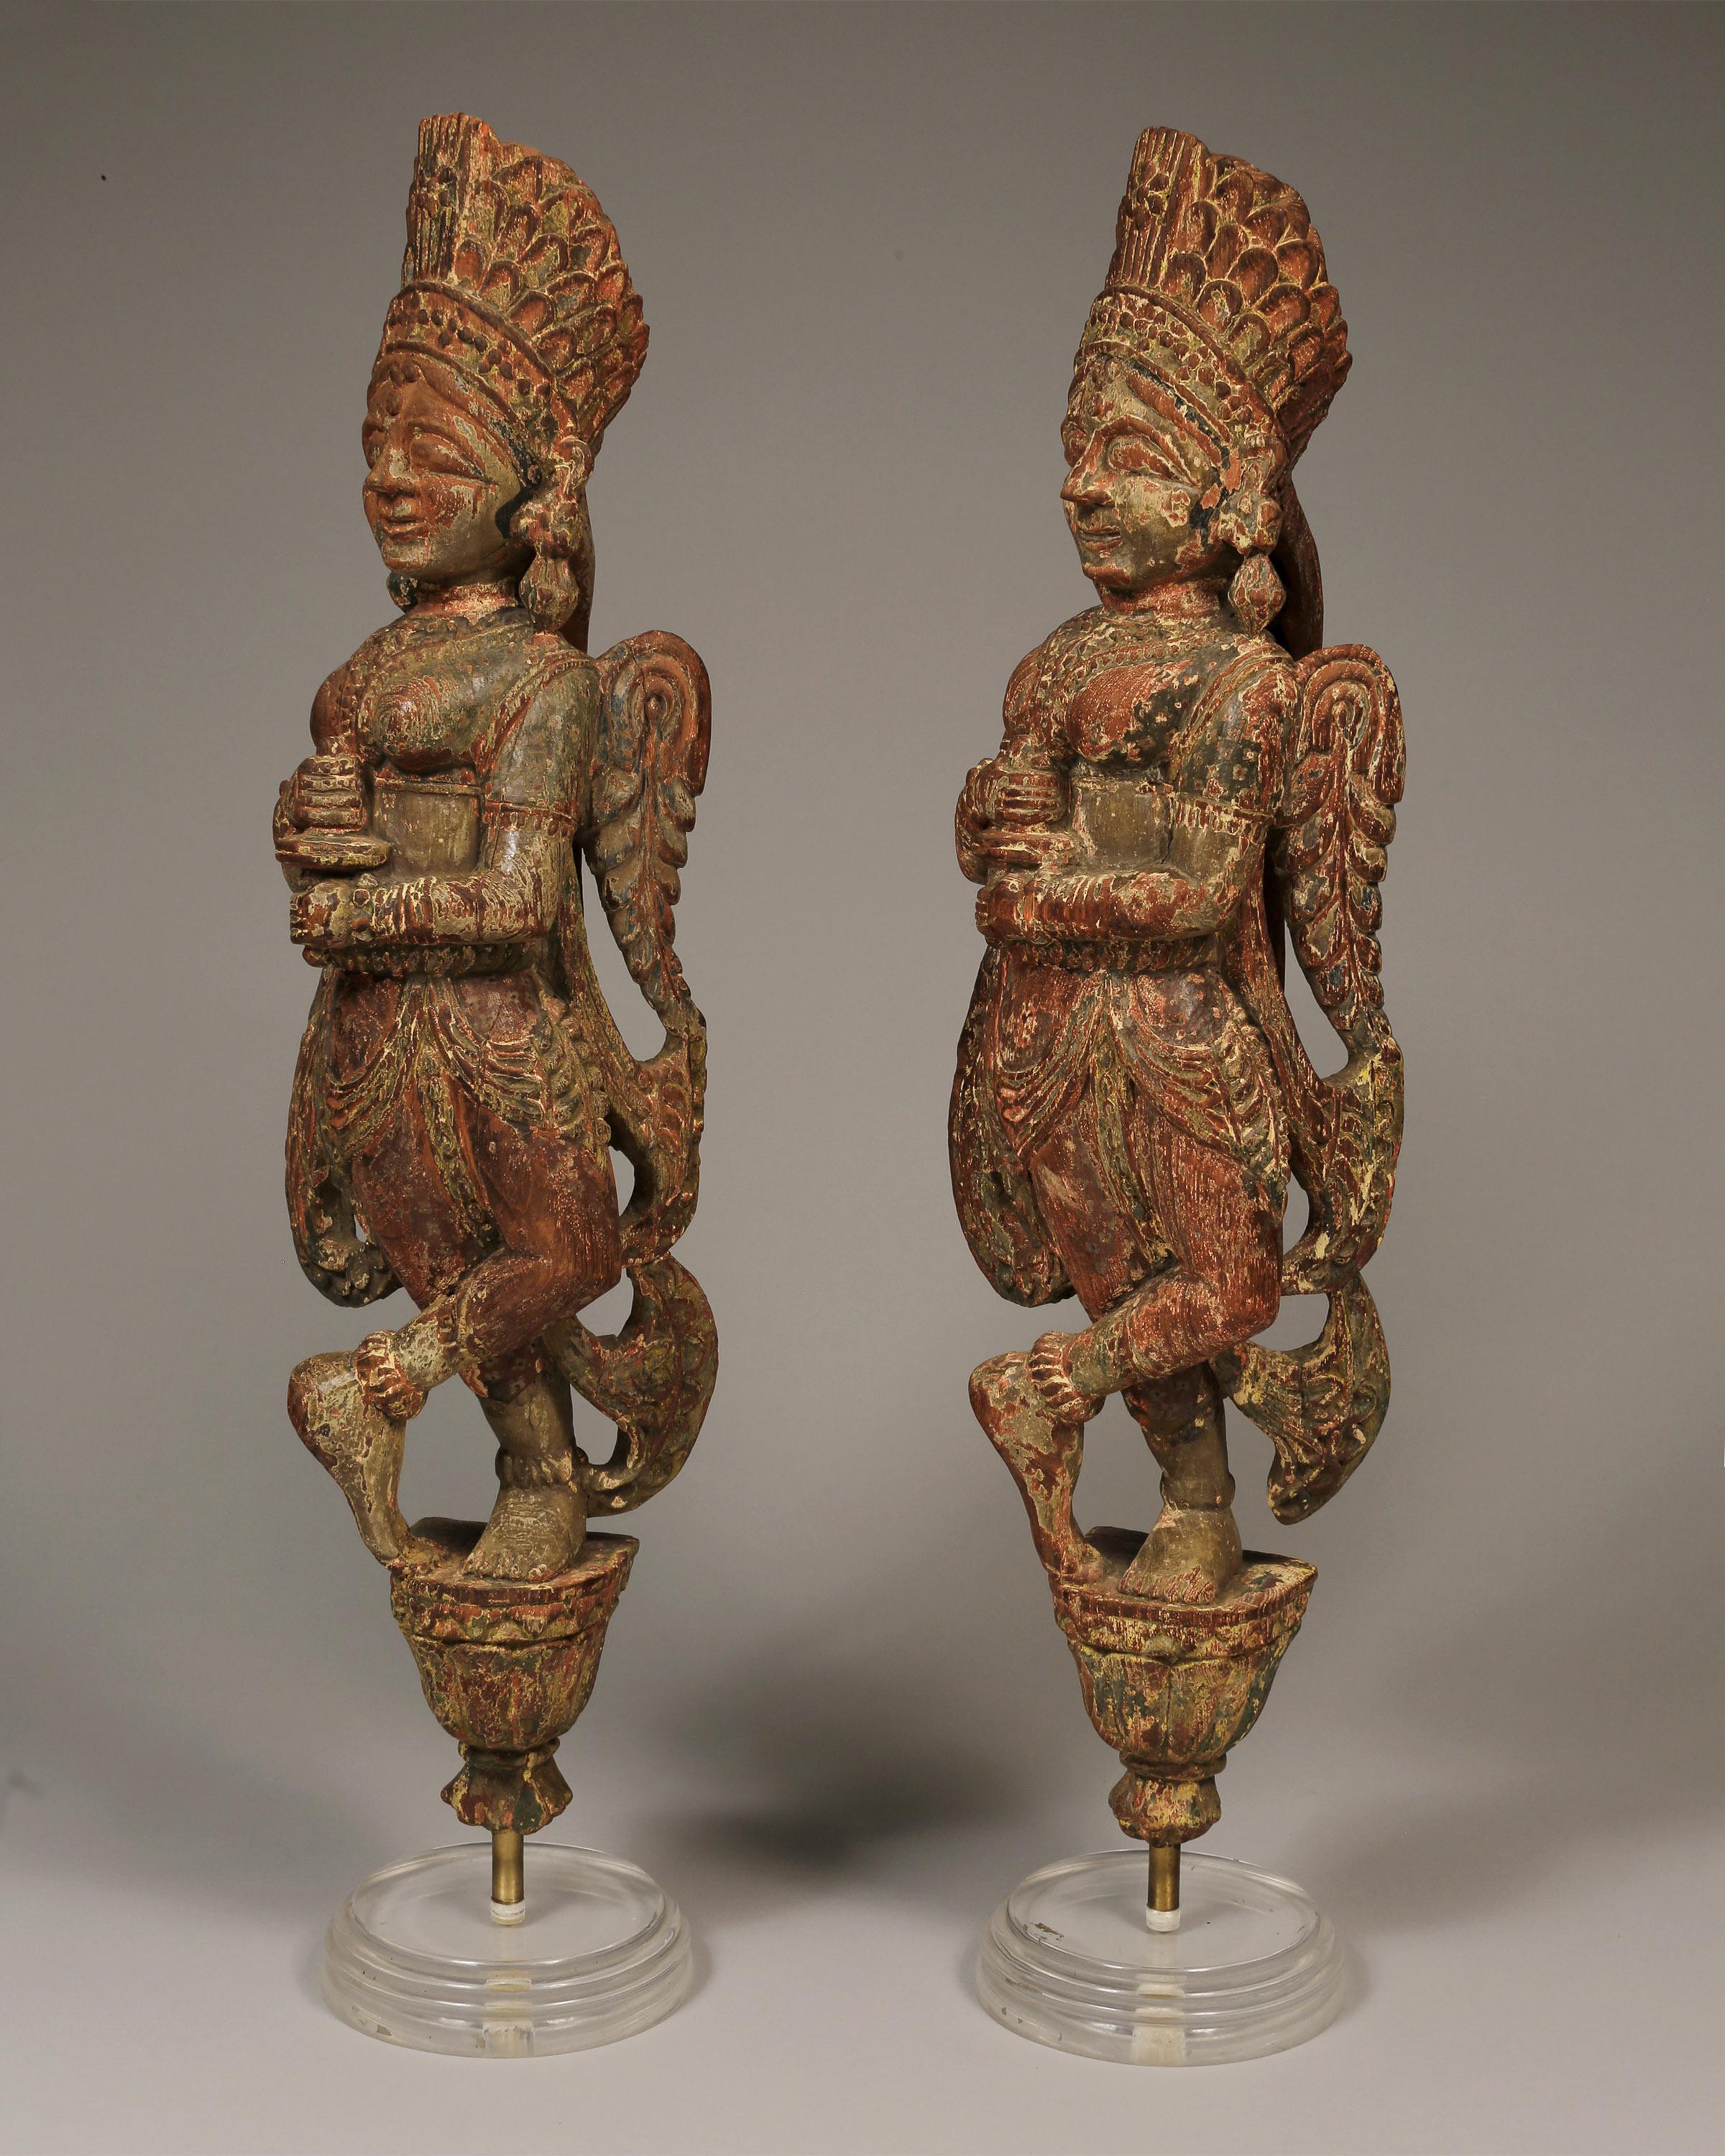 Pair of hand-carved wooden Chariot Angels from Gujarat, Rajasthan, 18th/19th century. 
Original polychrome colors. 

Topped with a tall headdress, the winged angels are depicted wearing earrings, necklaces and dresses. With arms holding an object